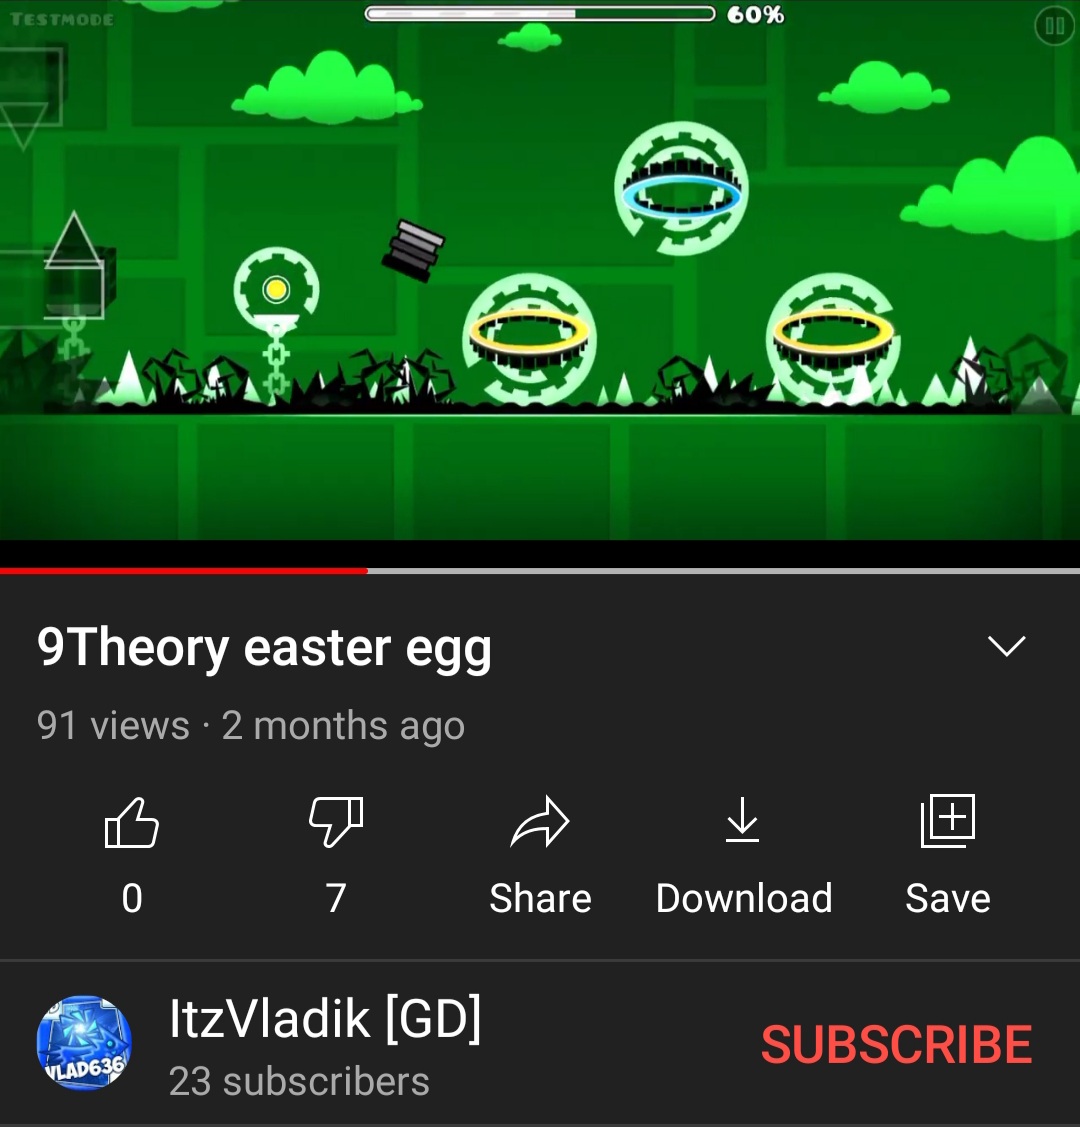 seeing stuff like this is why I'm scared to upload any level that's legendary on sparkylike how u gonna get mad at a level archive for uploading a level, or some random kid for showing off an easter egg? you don't own the rights to these levels